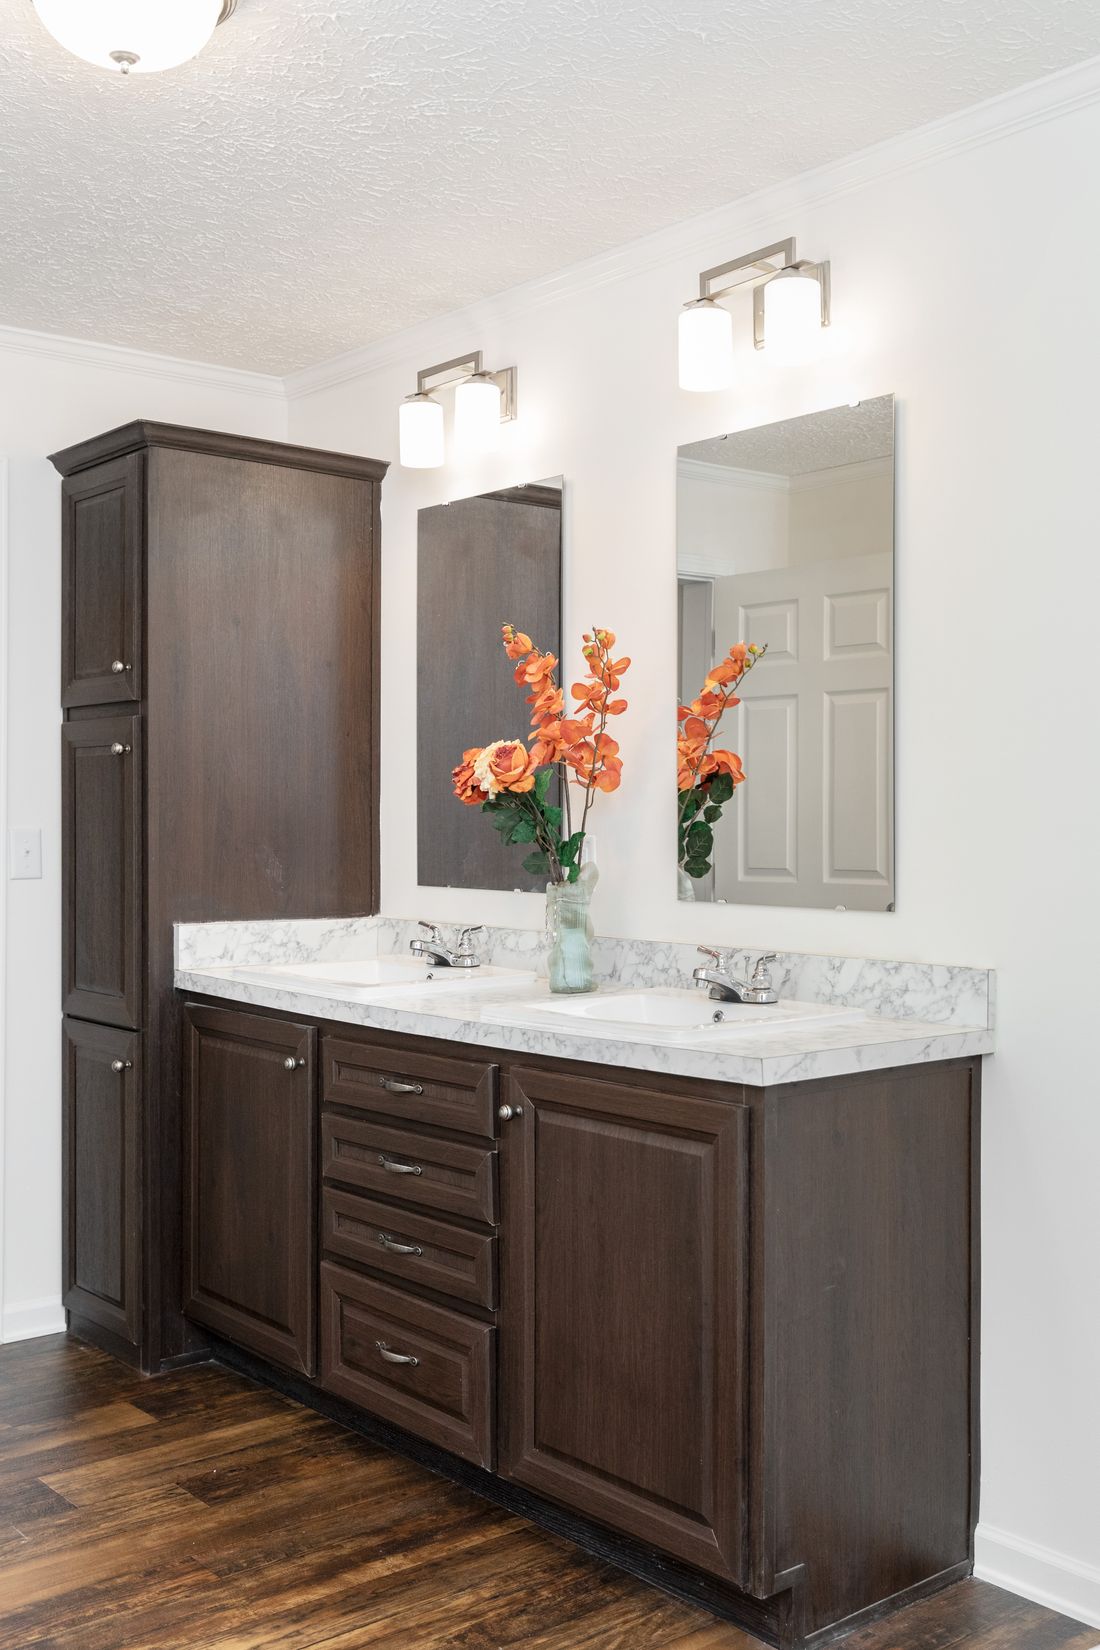 The 3321 CLASSIC Master Bathroom. This Modular Home features 4 bedrooms and 2 baths.